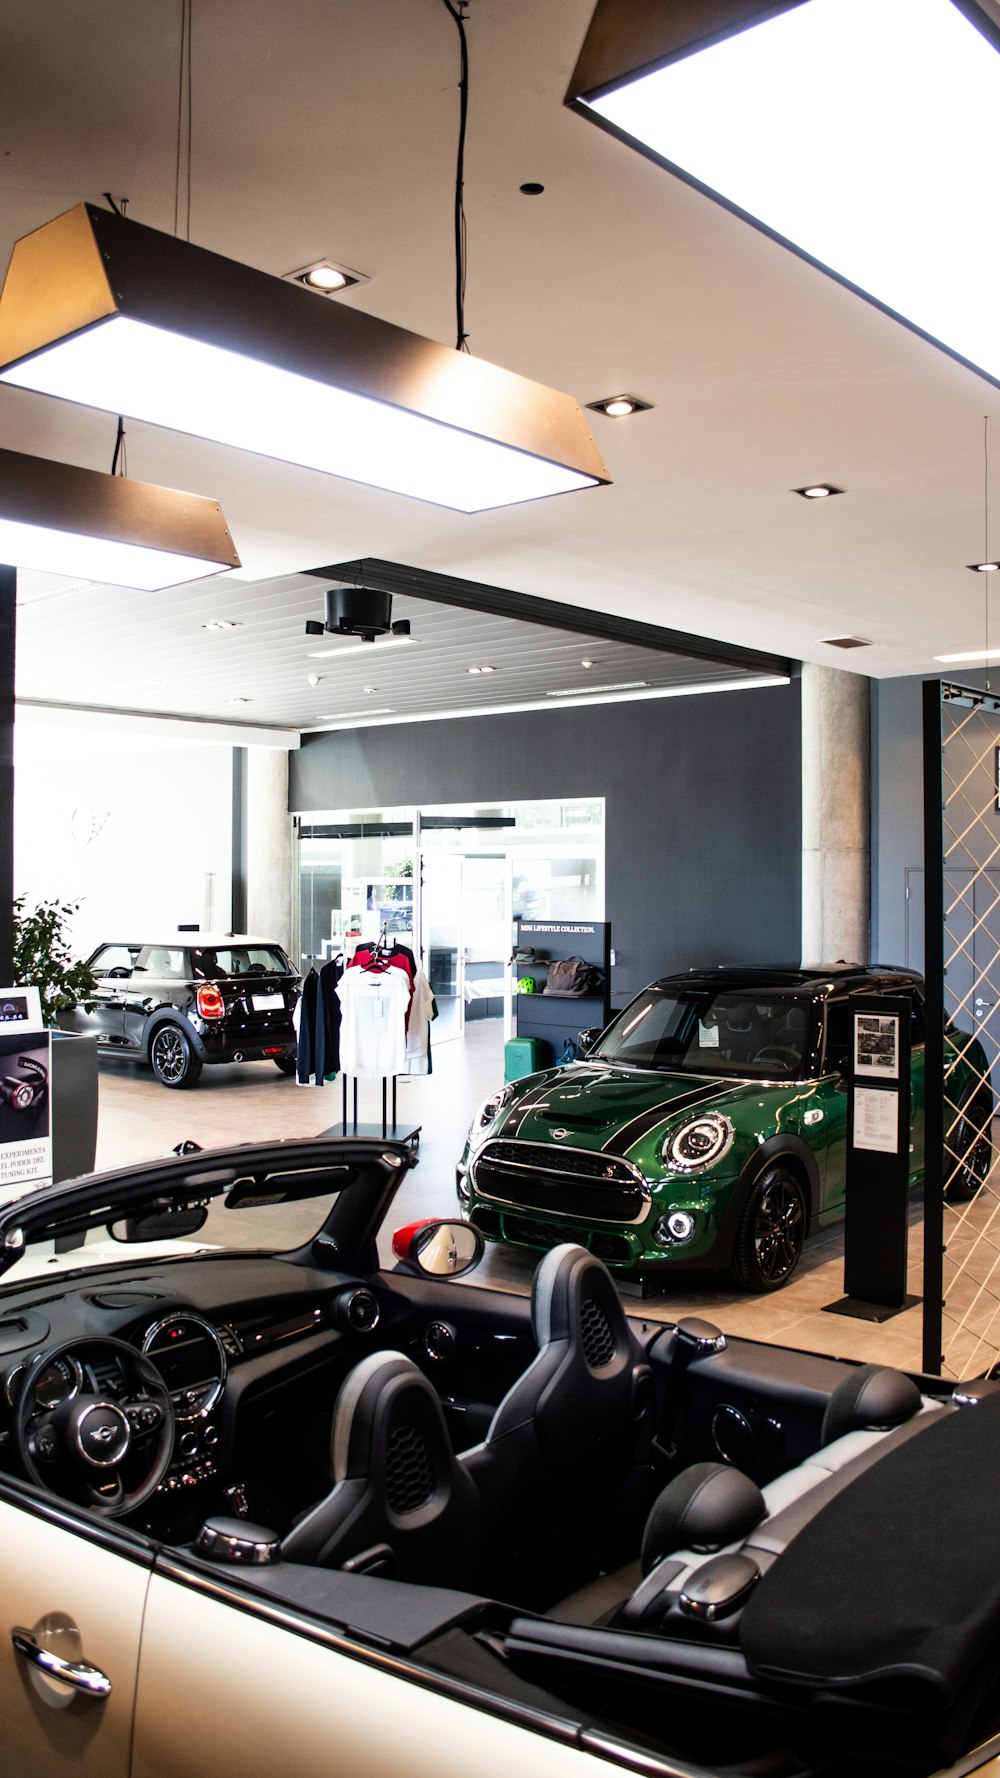 green and black car in a garage